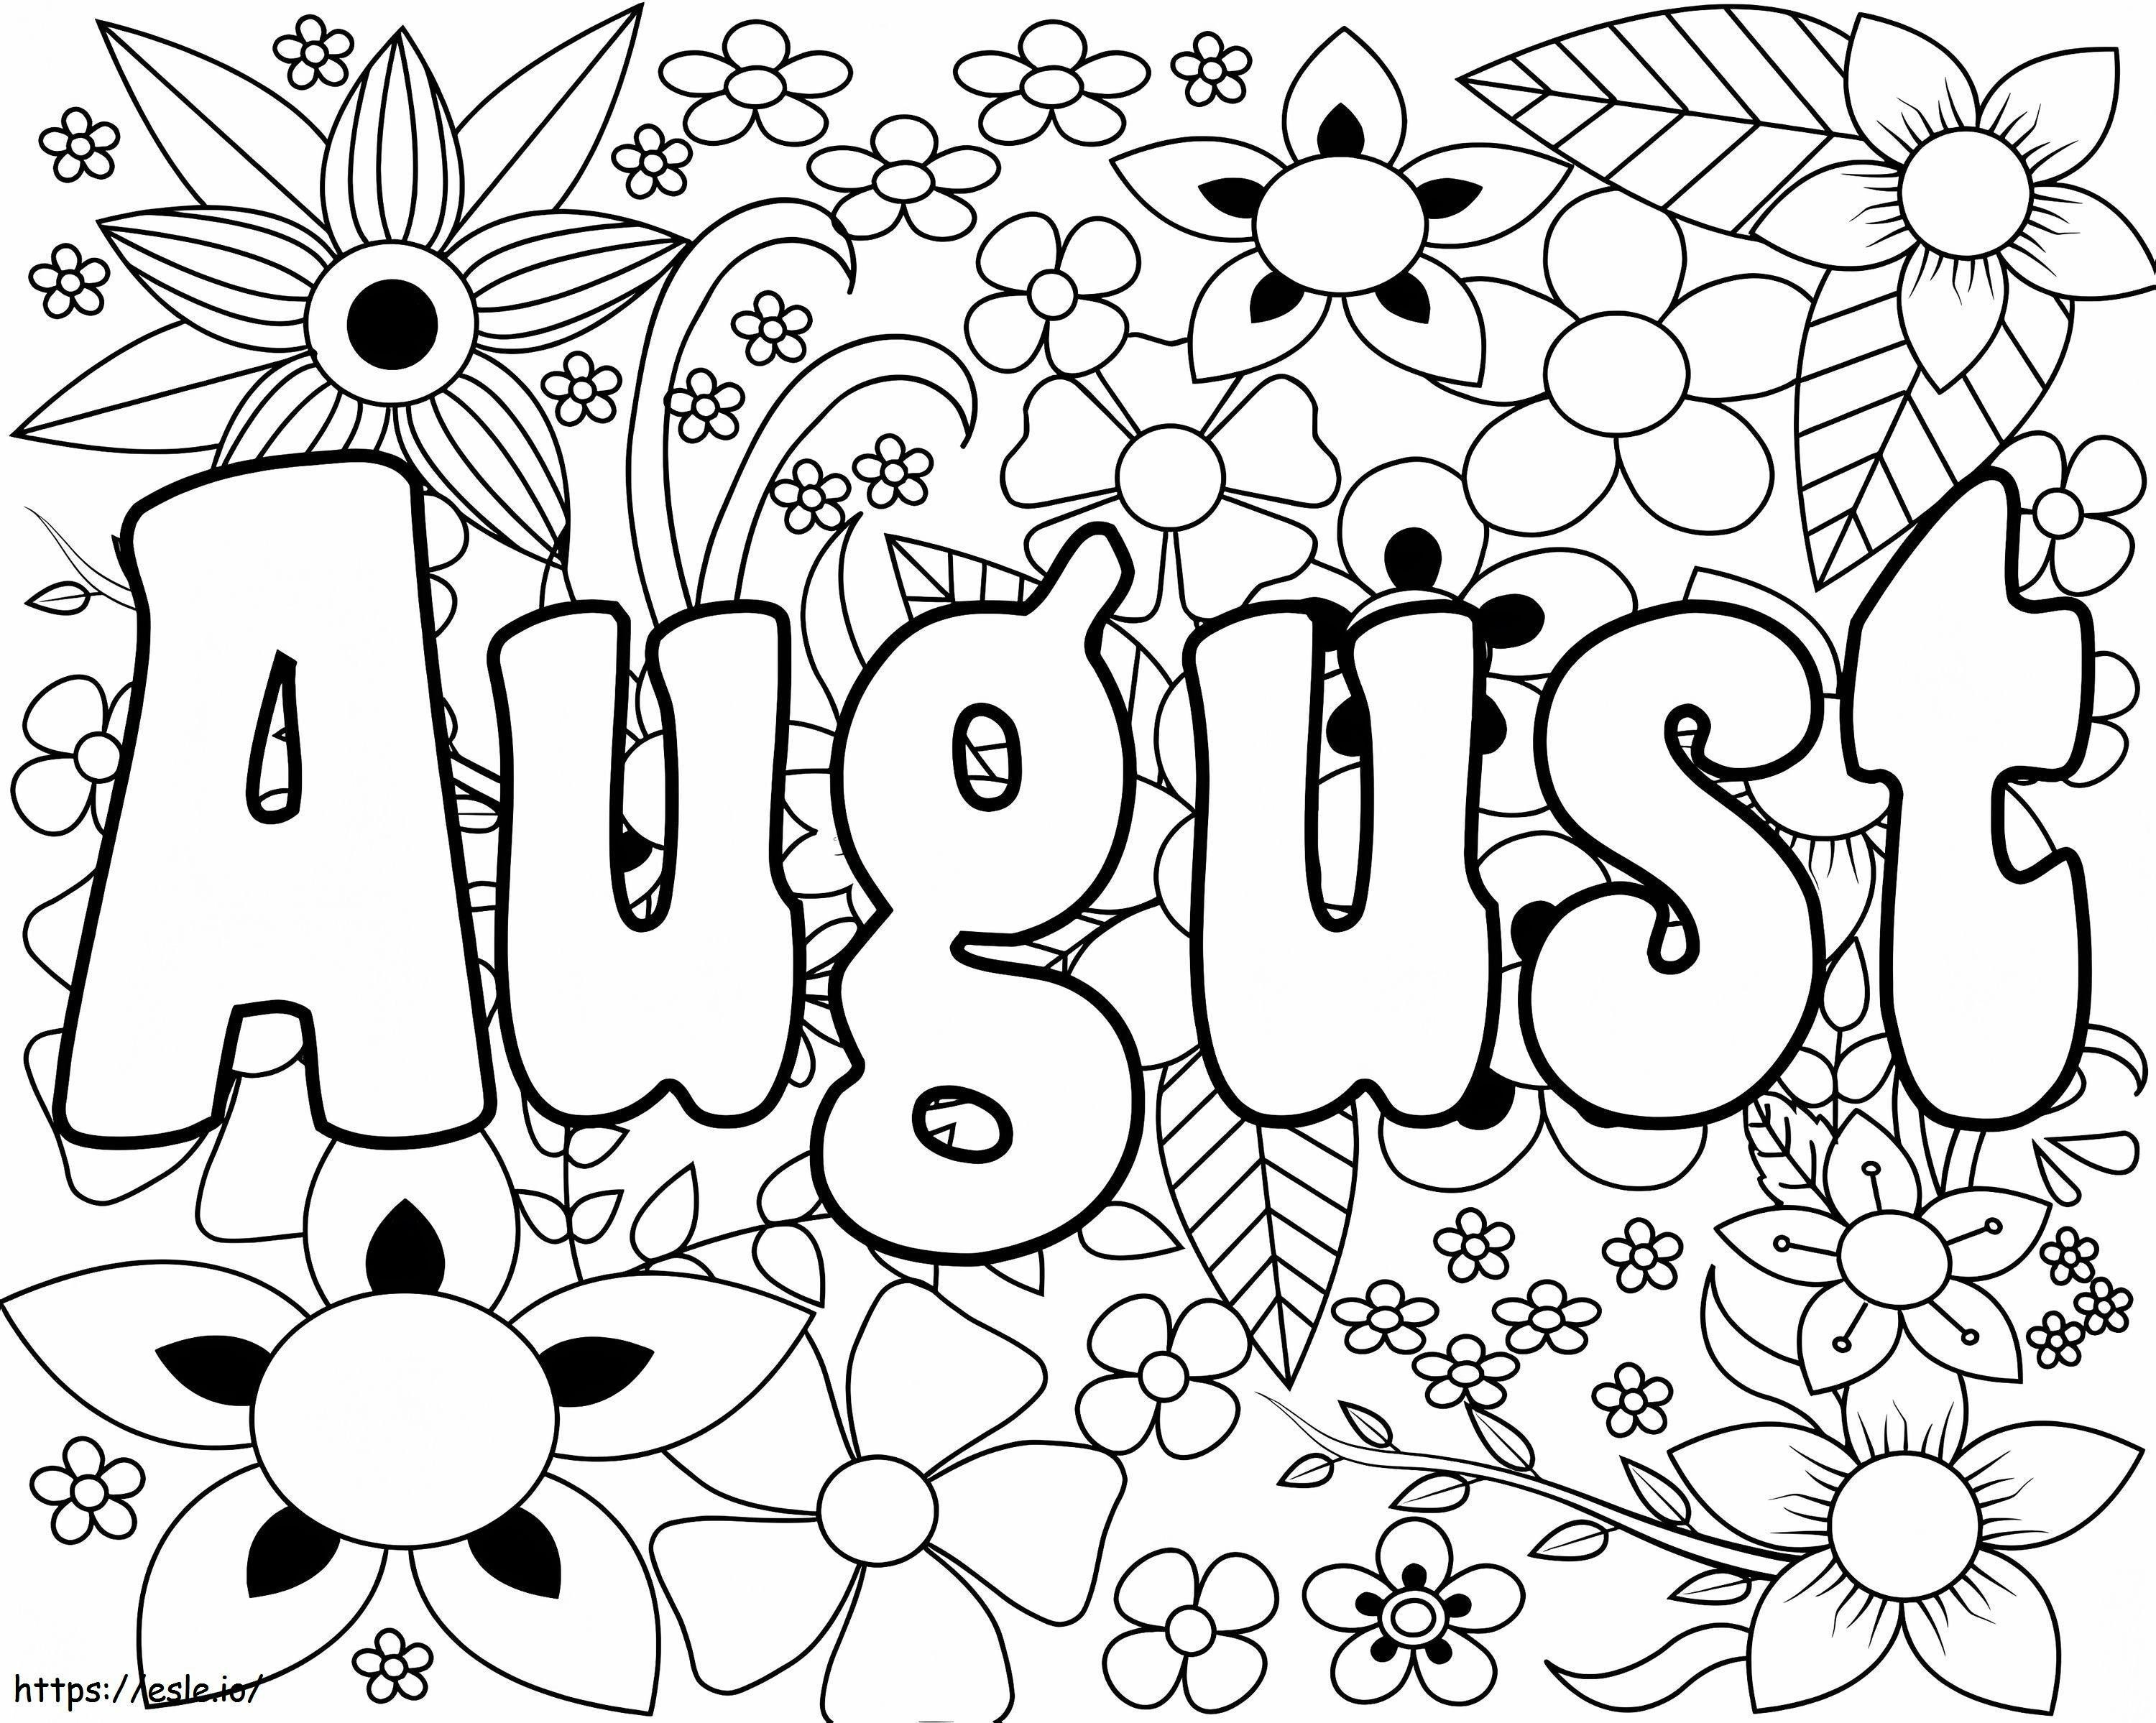 Hello August 1 coloring page